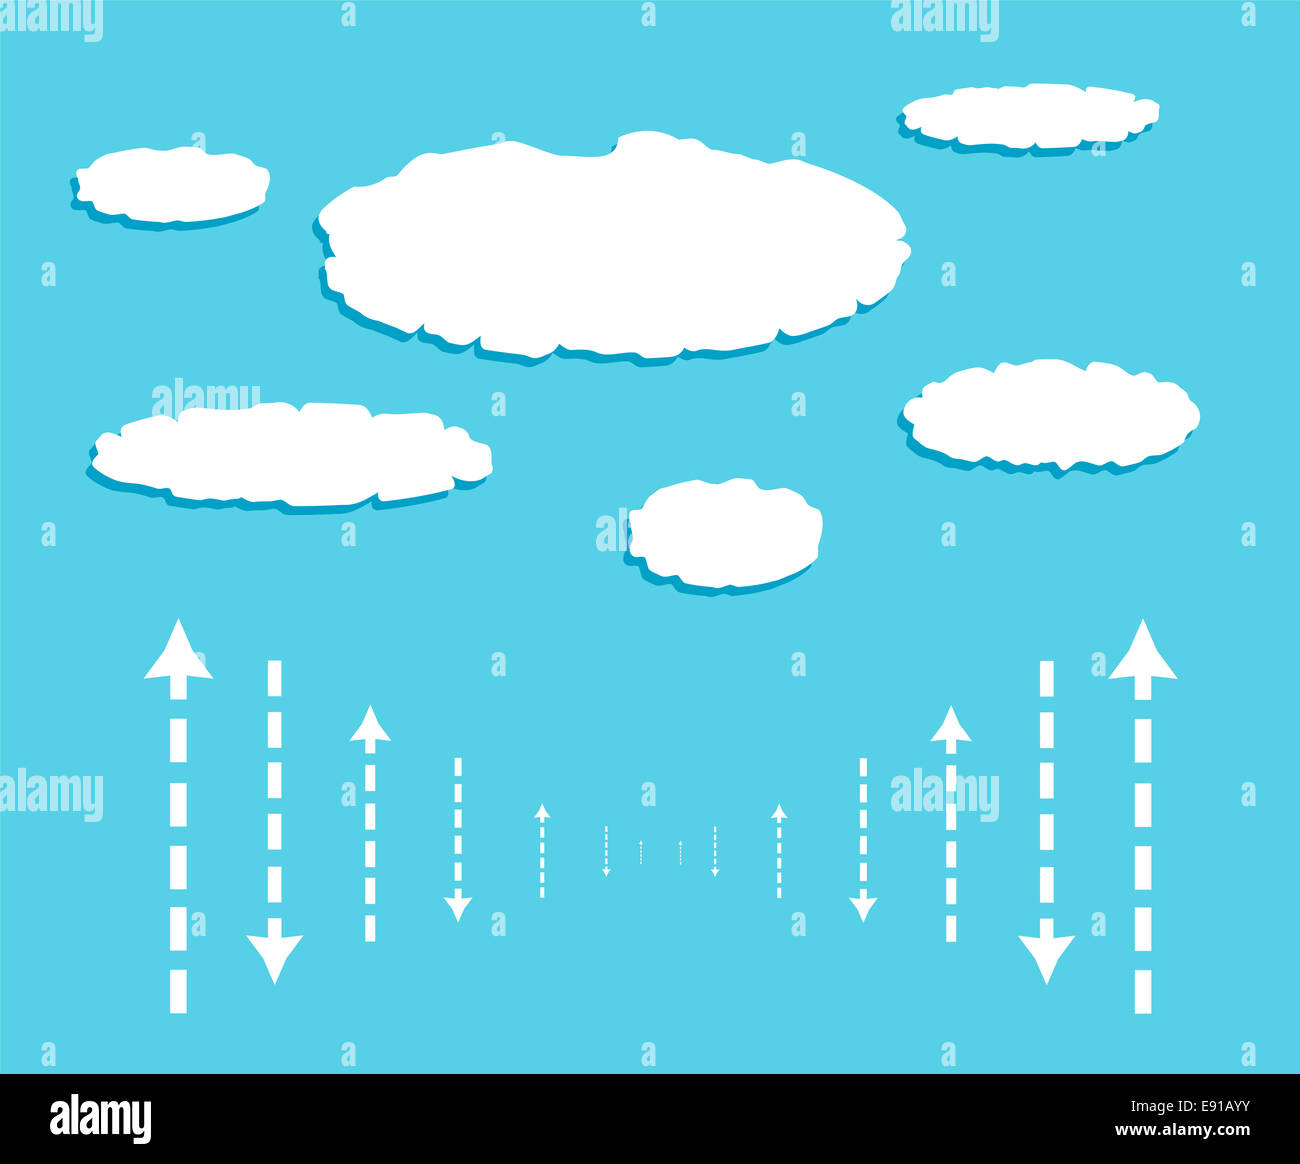 Cloud with data signals in form of arrows Stock Photo